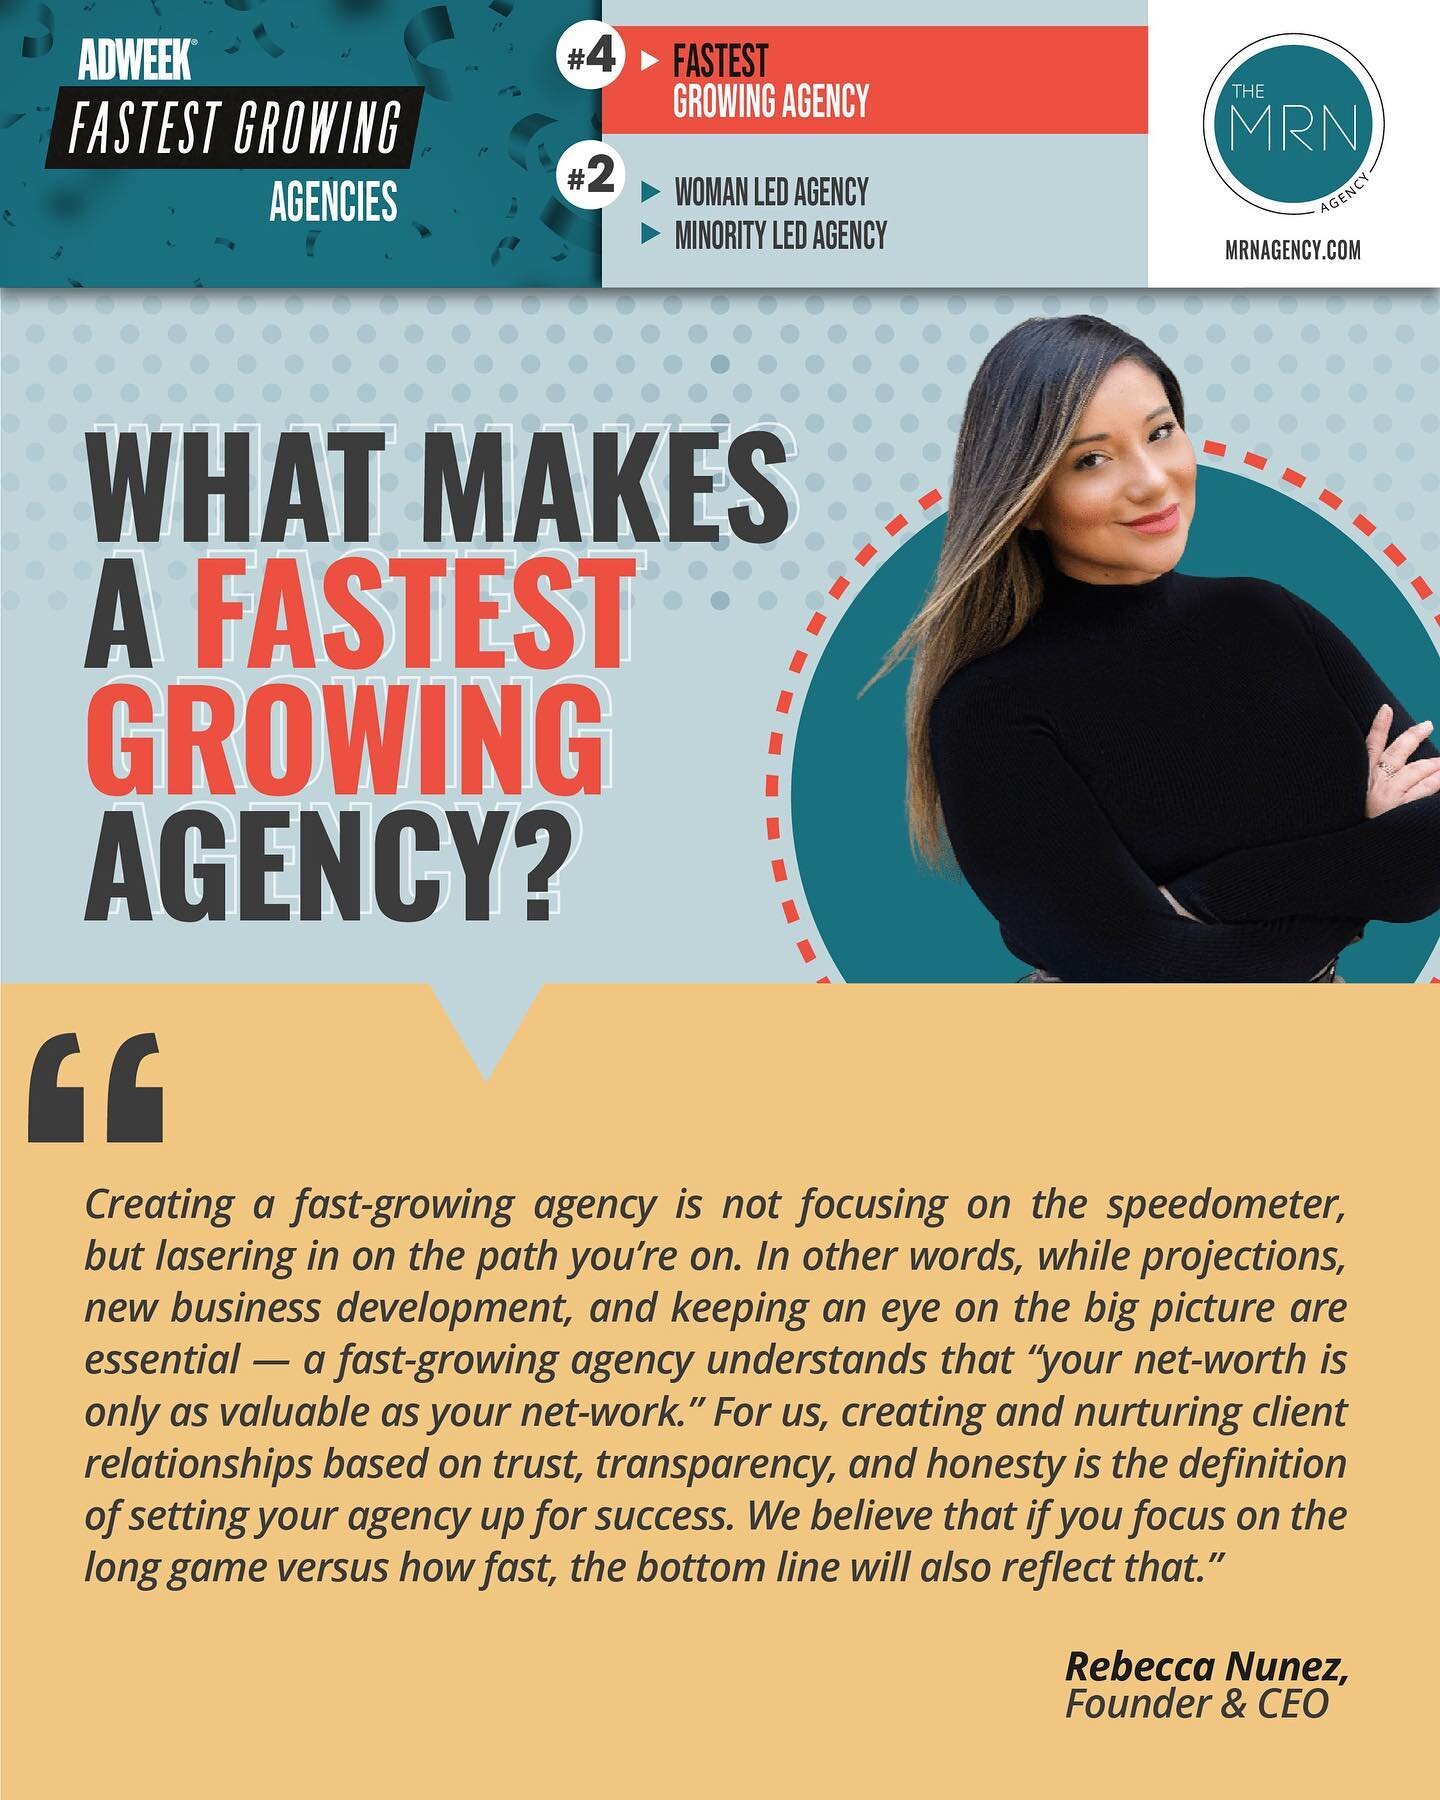 What makes a &quot;Fastest Growing Agency&quot;?

Our Founder and CEO, Rebecca Nunez, tells us what it took to catapult a boutique agency into the national spotlight.

#adweek #fastestgrowingagencies #womenowned #womenled #minorityled #minorityowned 